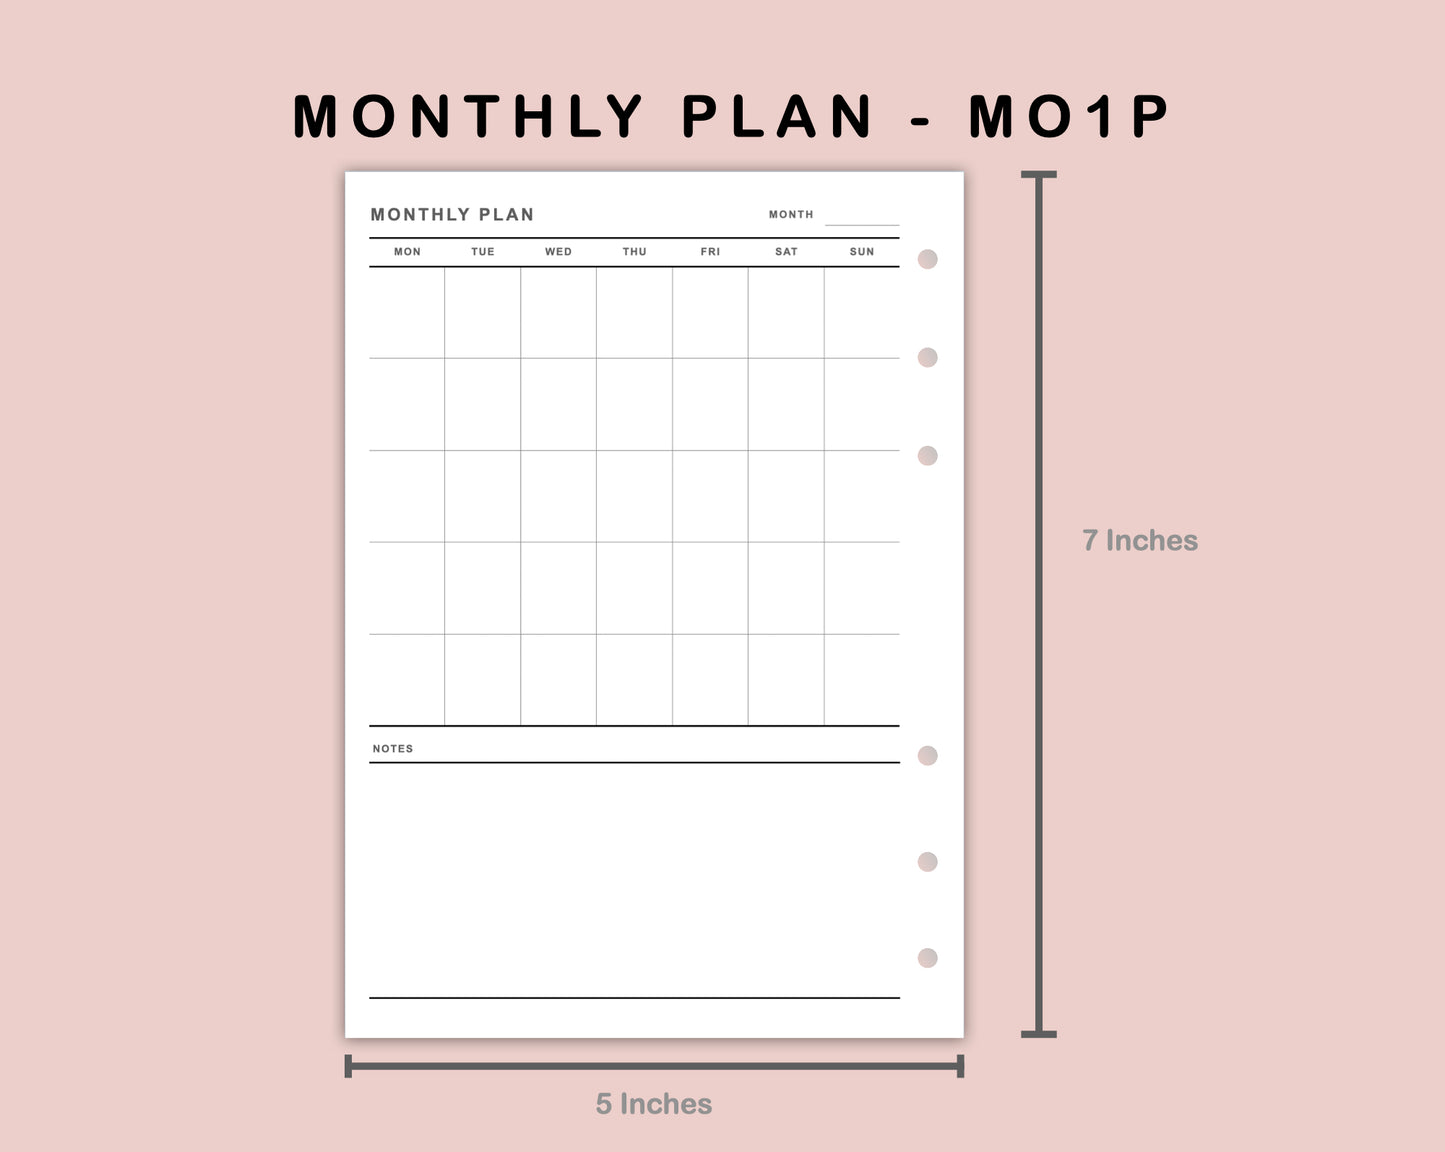 B6 Inserts - Monthly Plan - MO1P